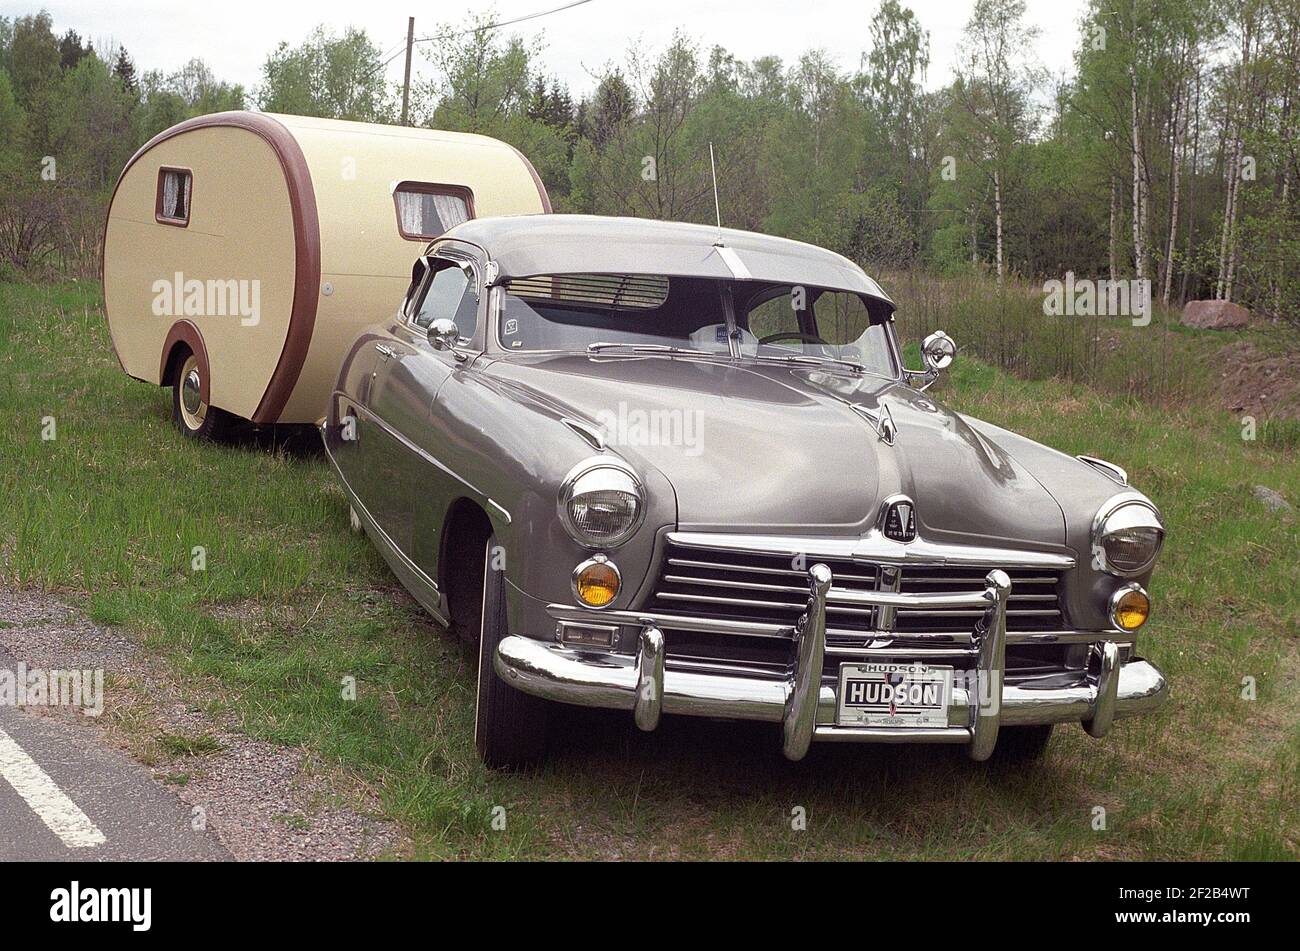 Vintage camping. An american 1950s car with a vintage looking caravan trailer photographed on the side of the road. Stock Photo